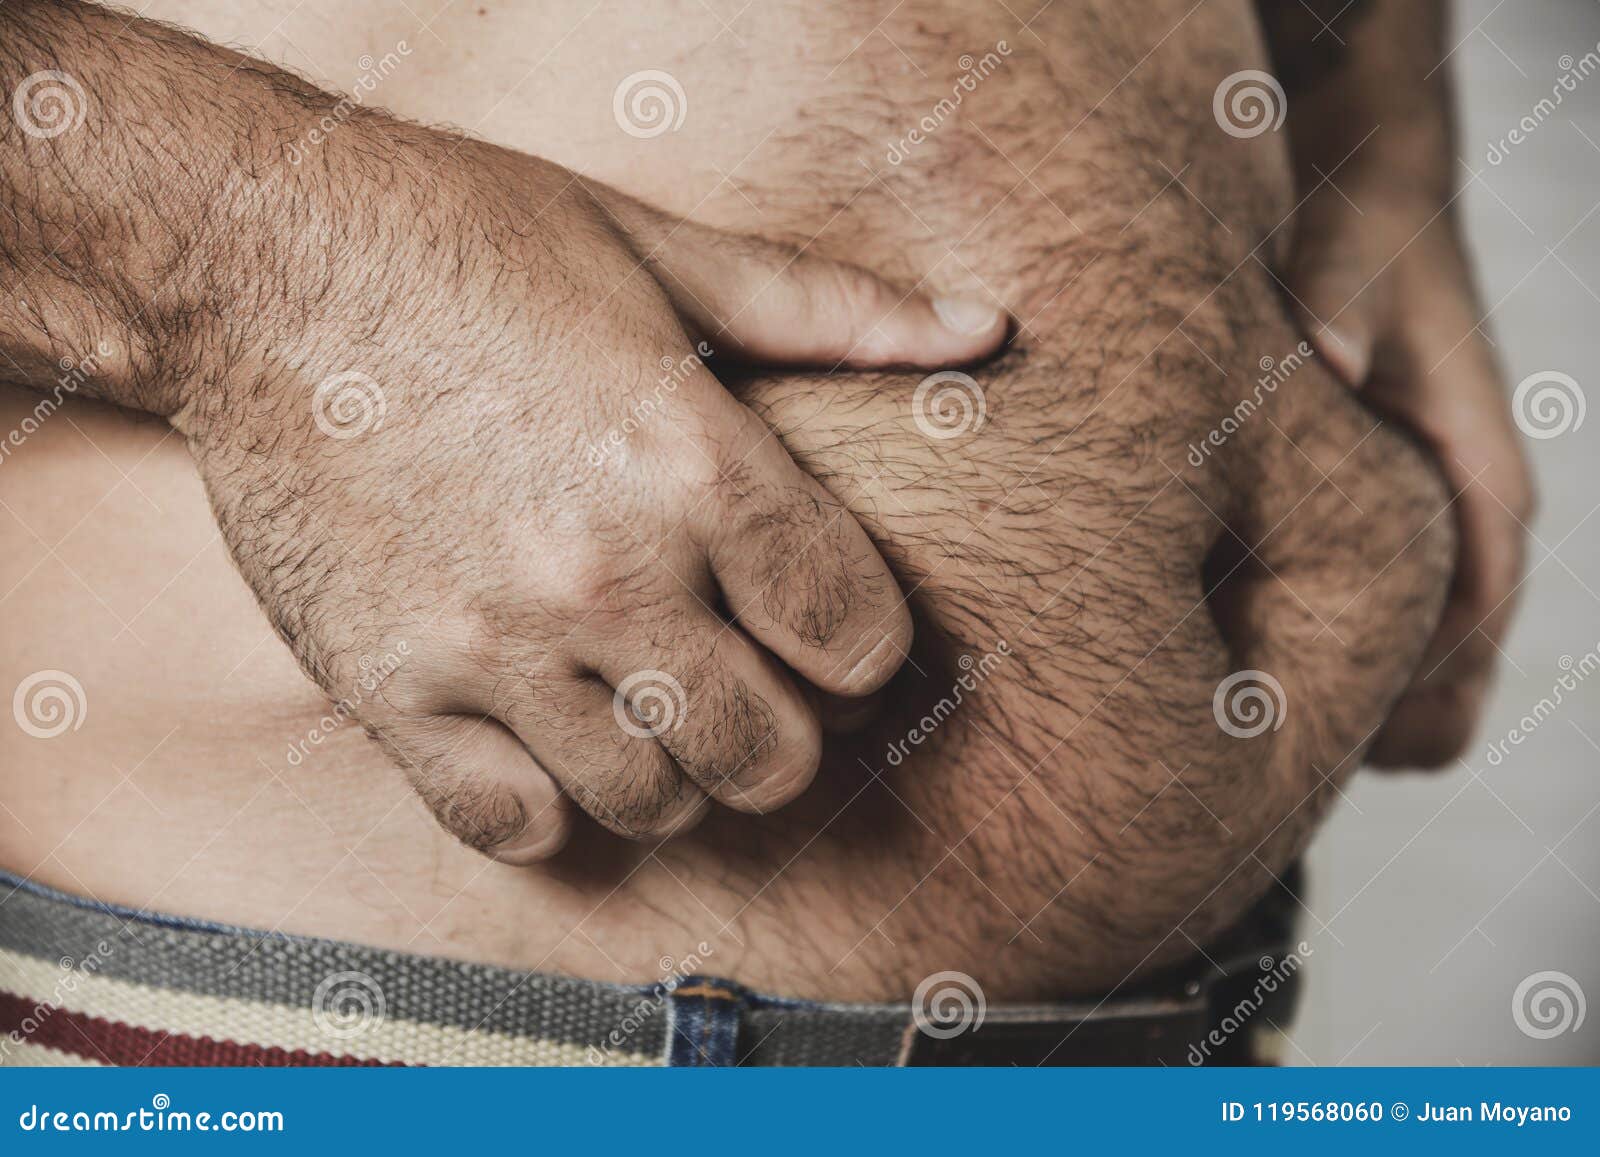 Closeup of a caucasian man grabbing the fat of his hairy stomach.